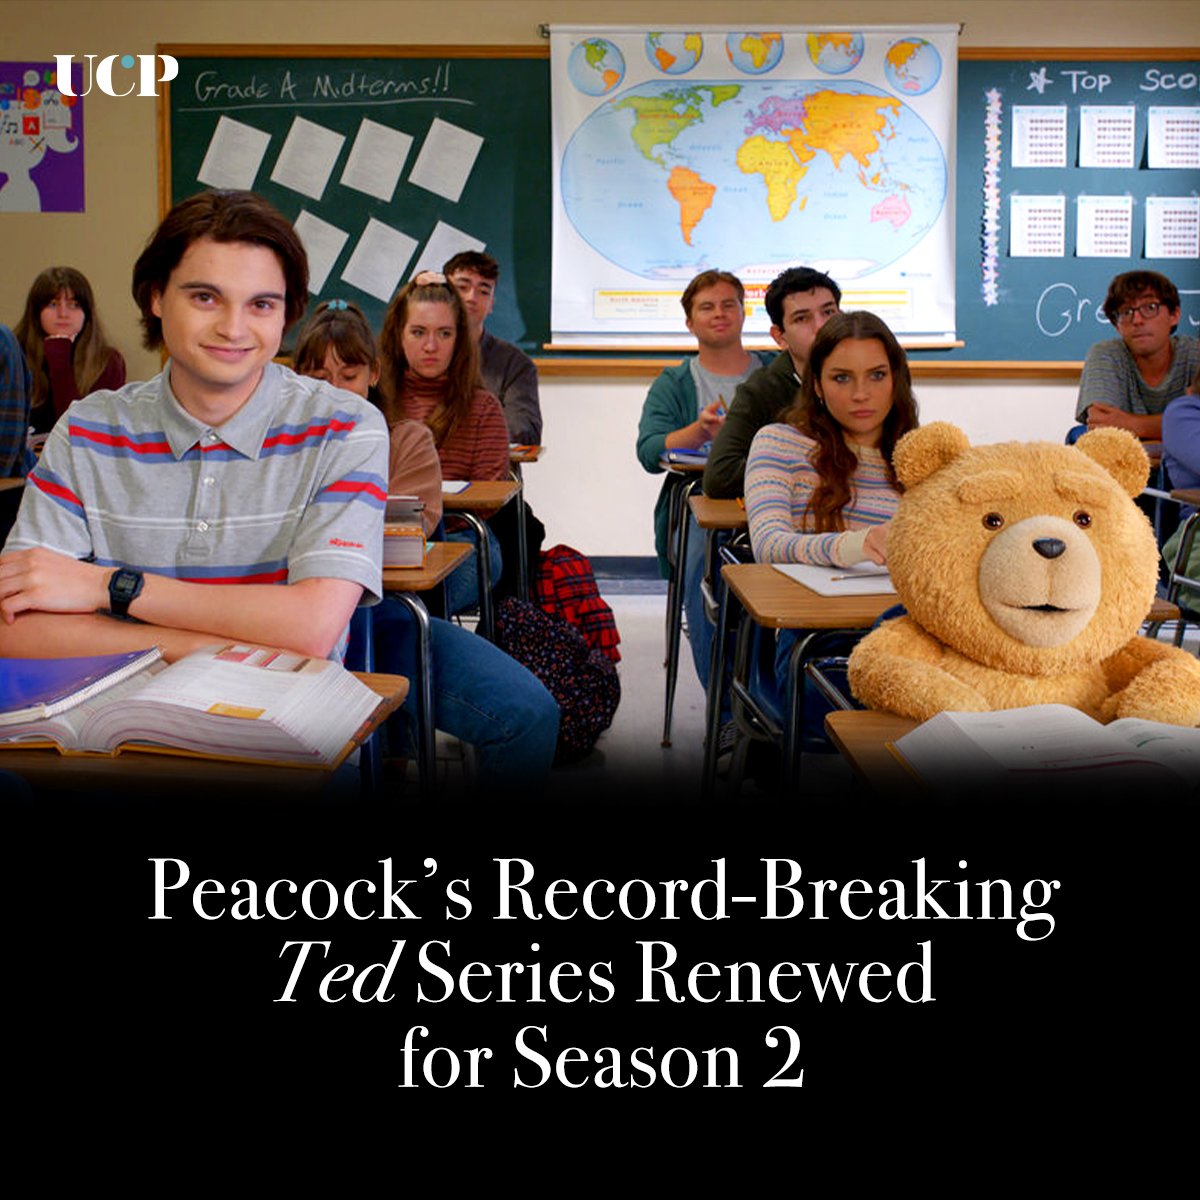 Everyone's favorite furry friend is coming back! @Peacock's record-breaking #TedSeries has been renewed for Season 2!